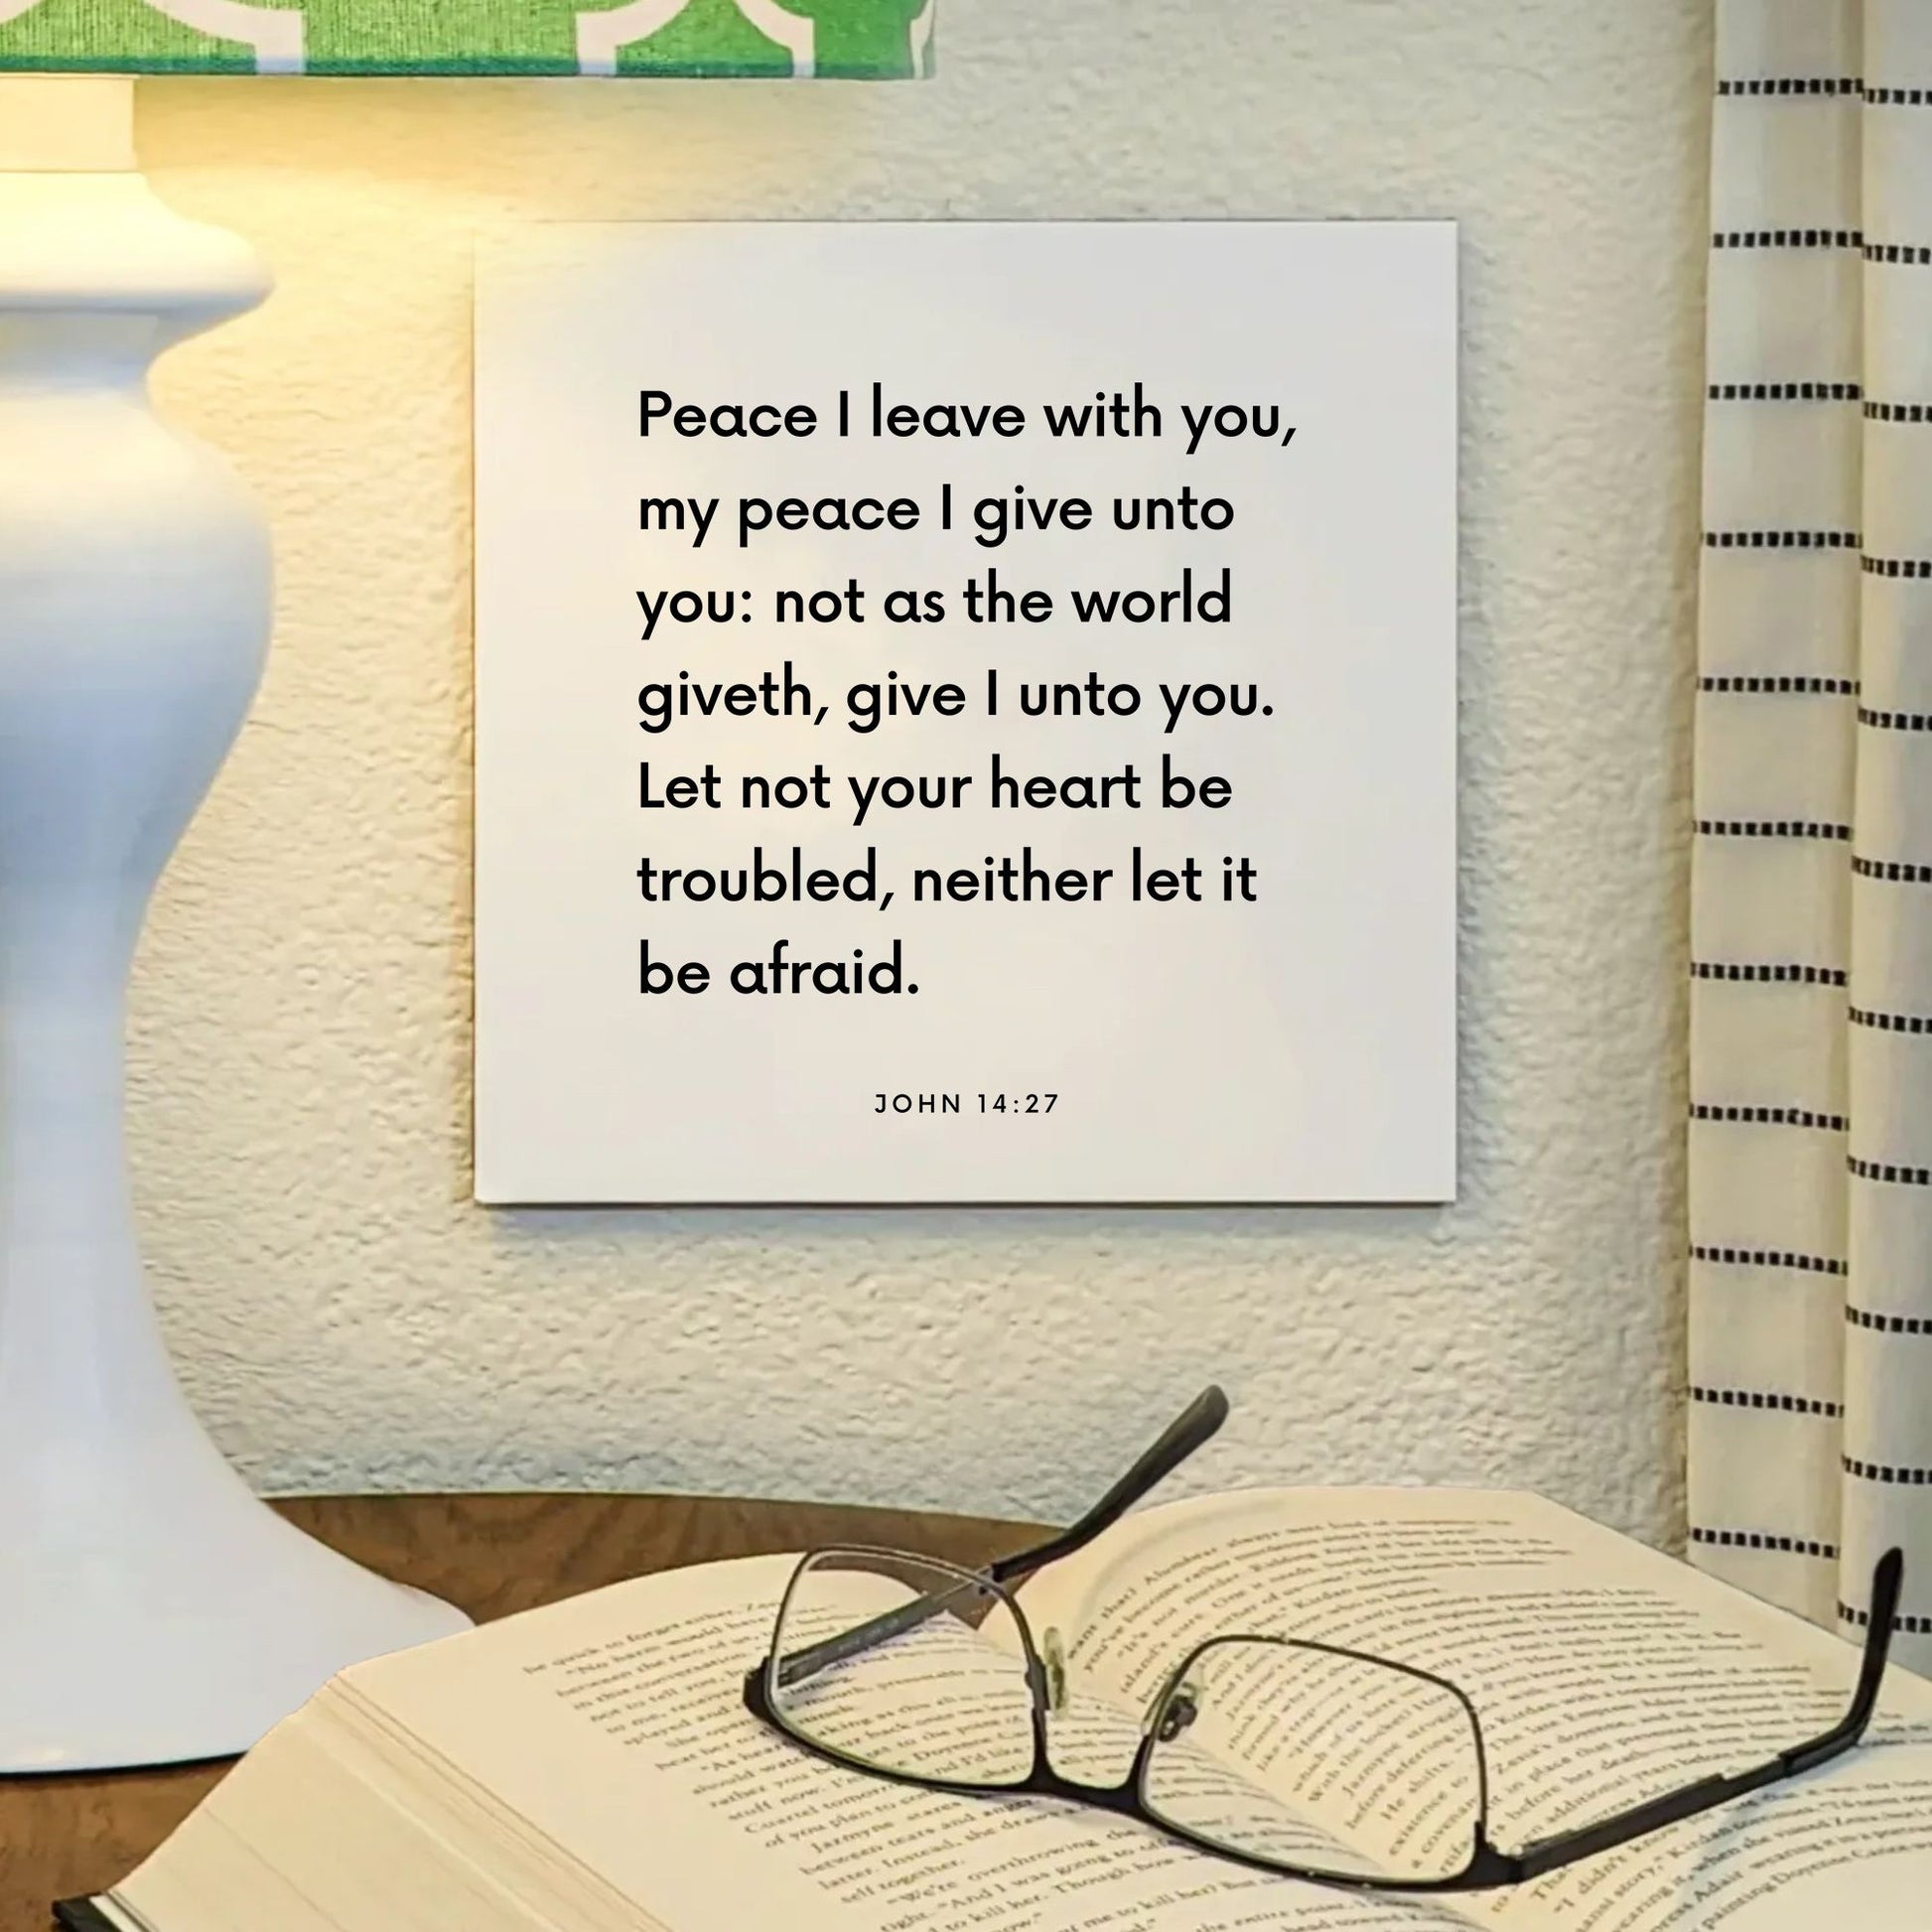 Lamp mouting of the scripture tile for John 14:27 - "Peace I leave with you, my peace I give unto you"